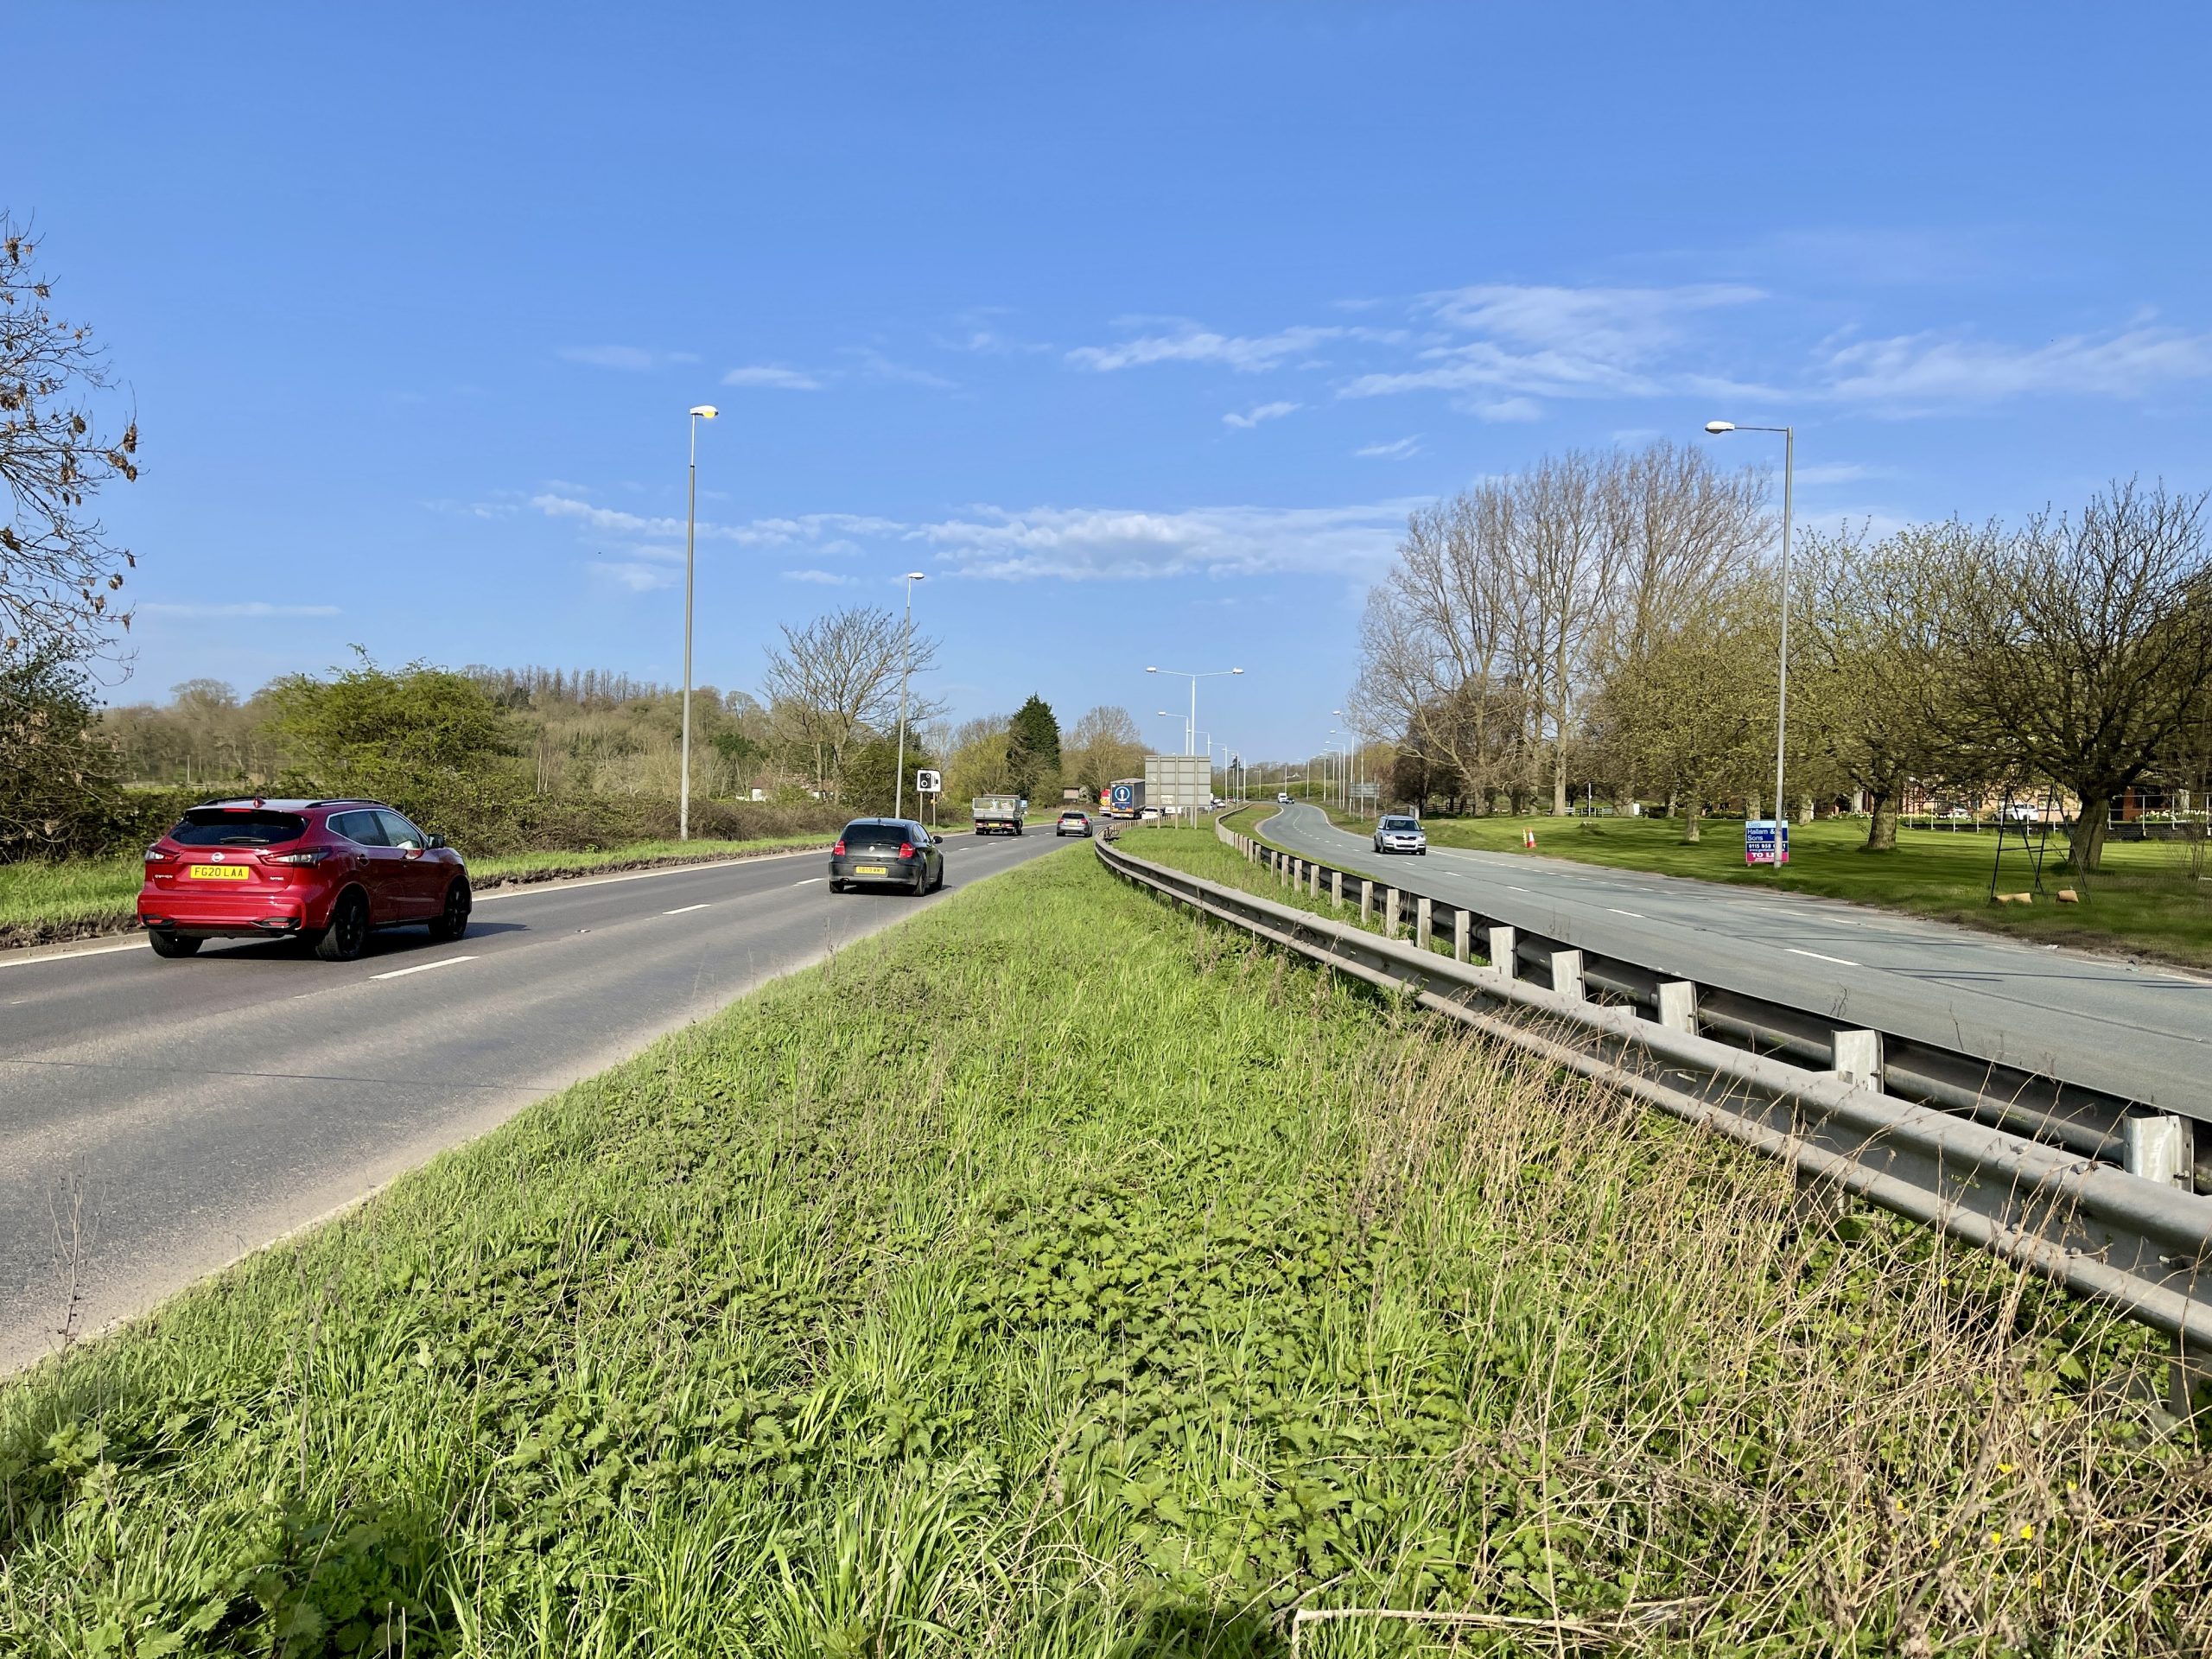 Trees and shrubs cause blind spots for those crossing the A52 © westbridgfordwire.com